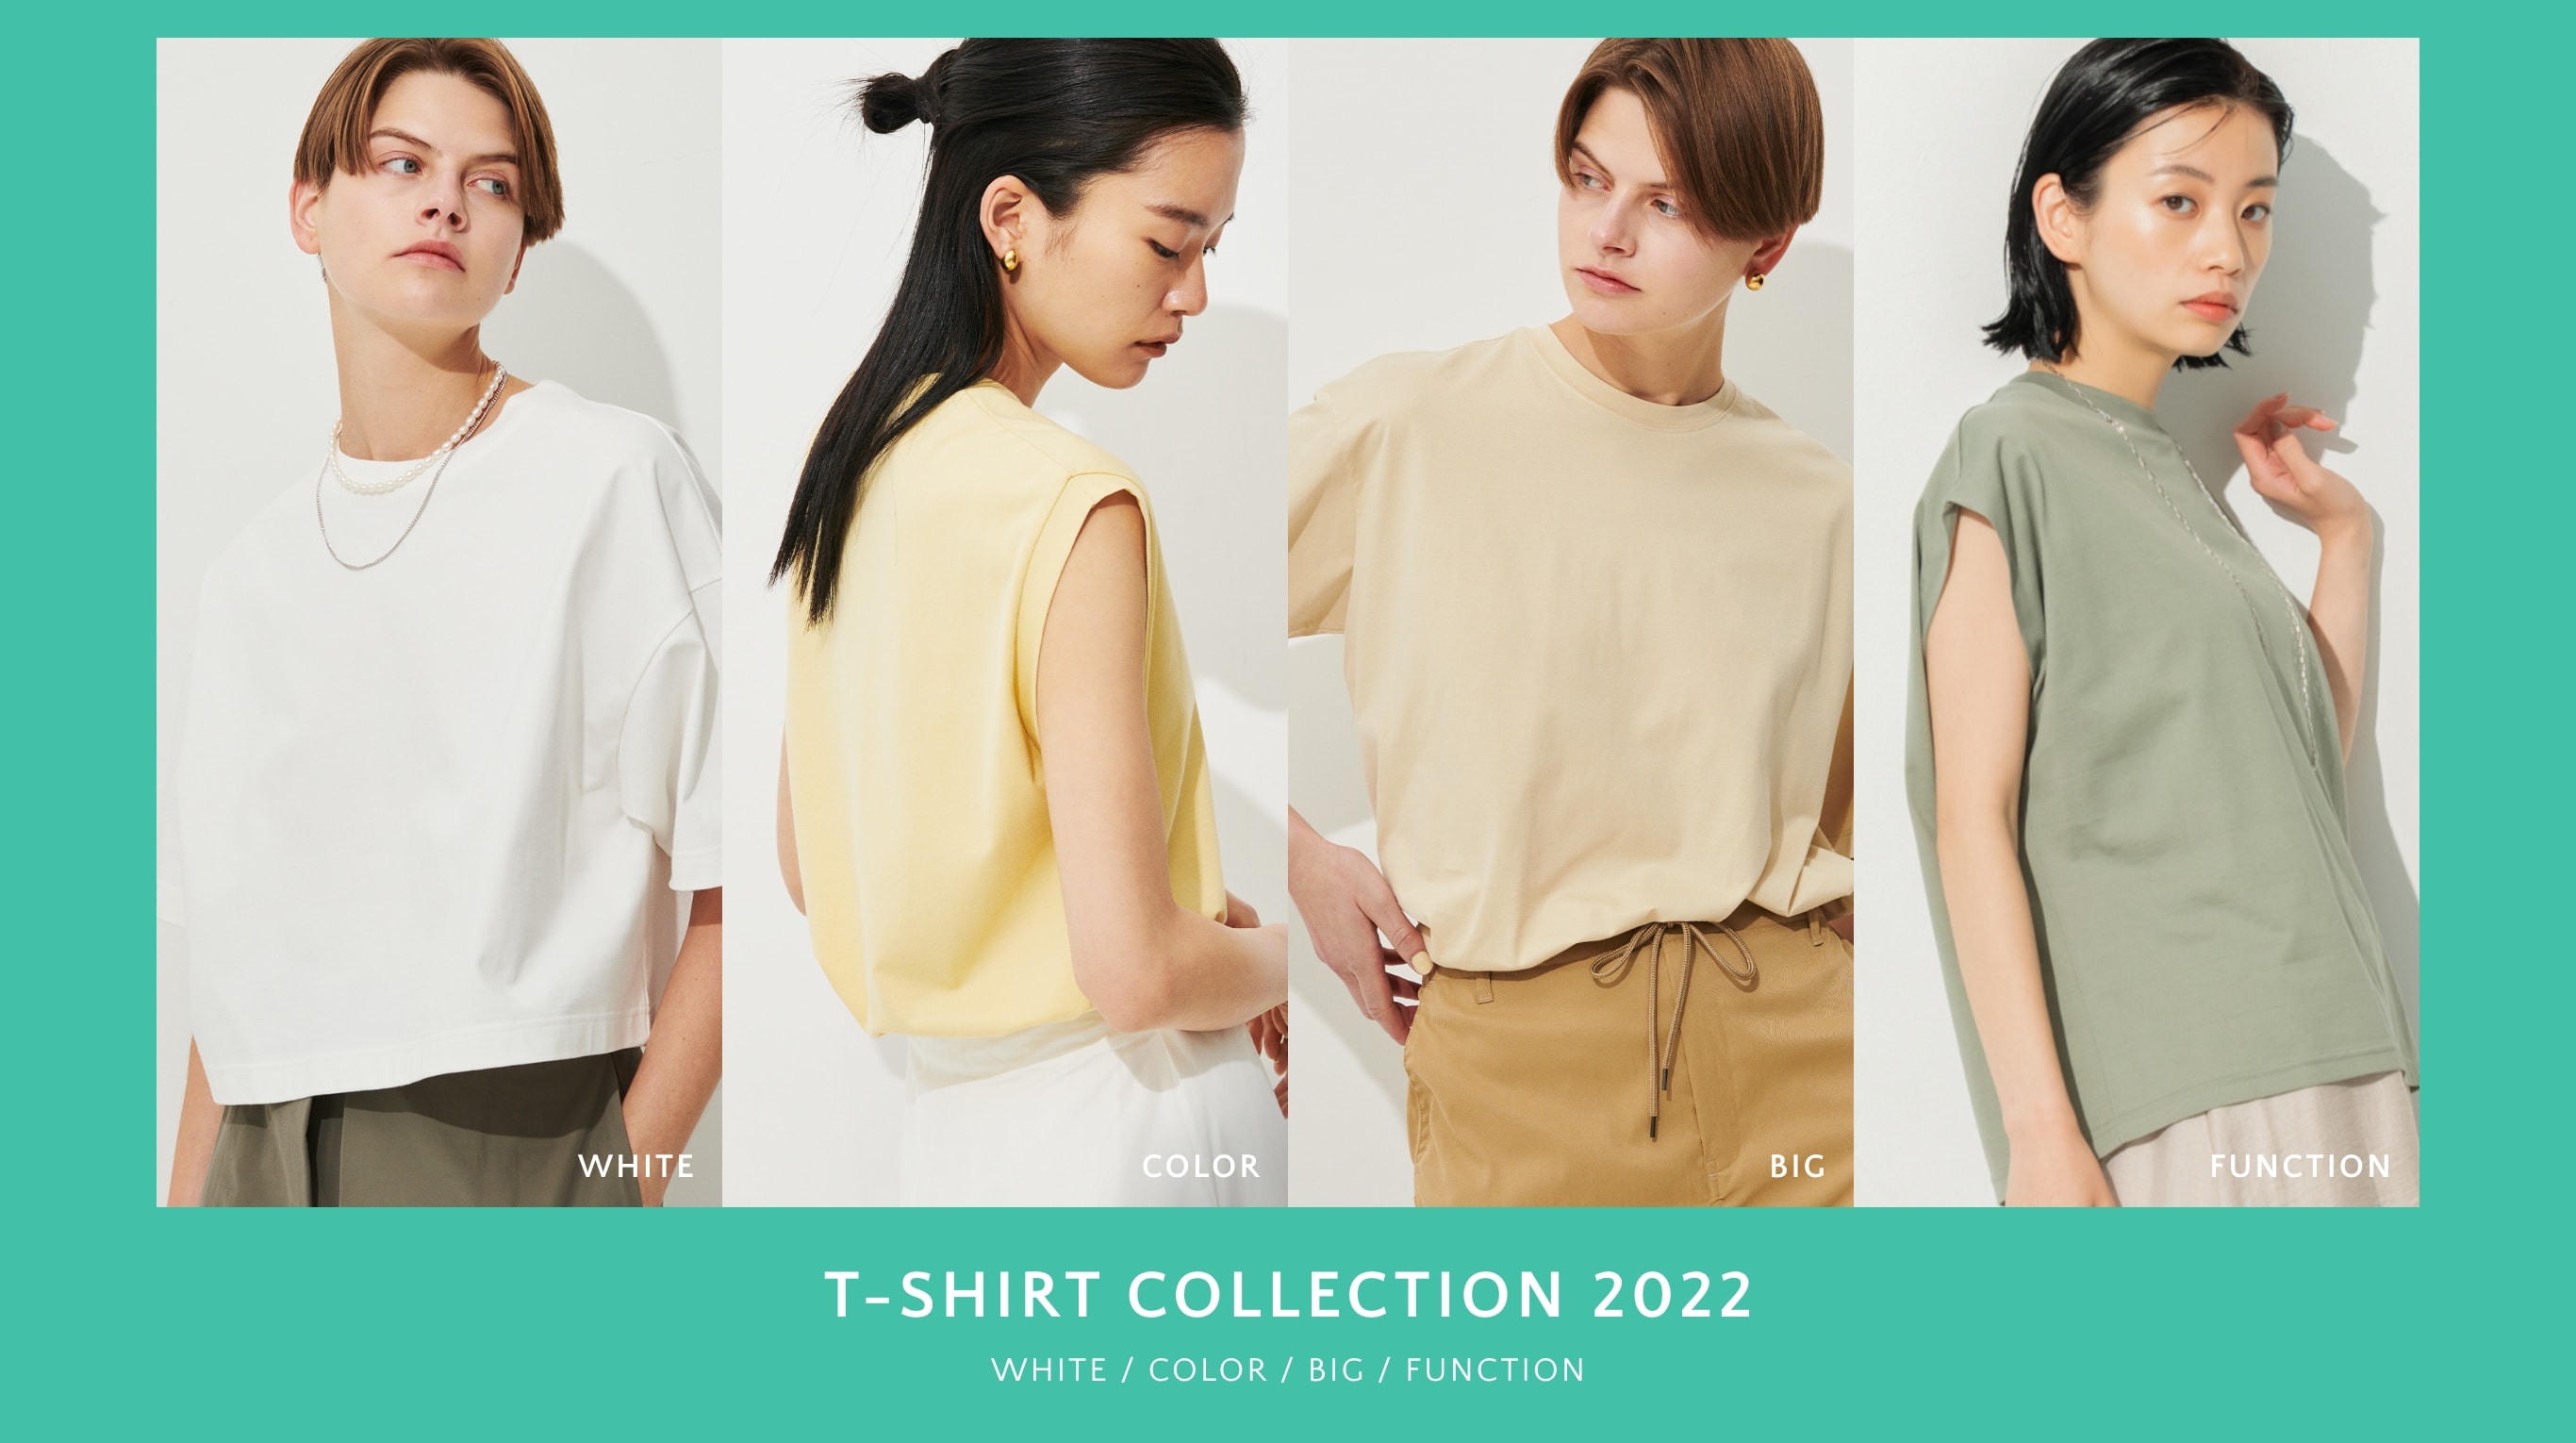 T-SHIRT COLLECTION 2022 WHITE / COLOR / BIG / FUNCTION